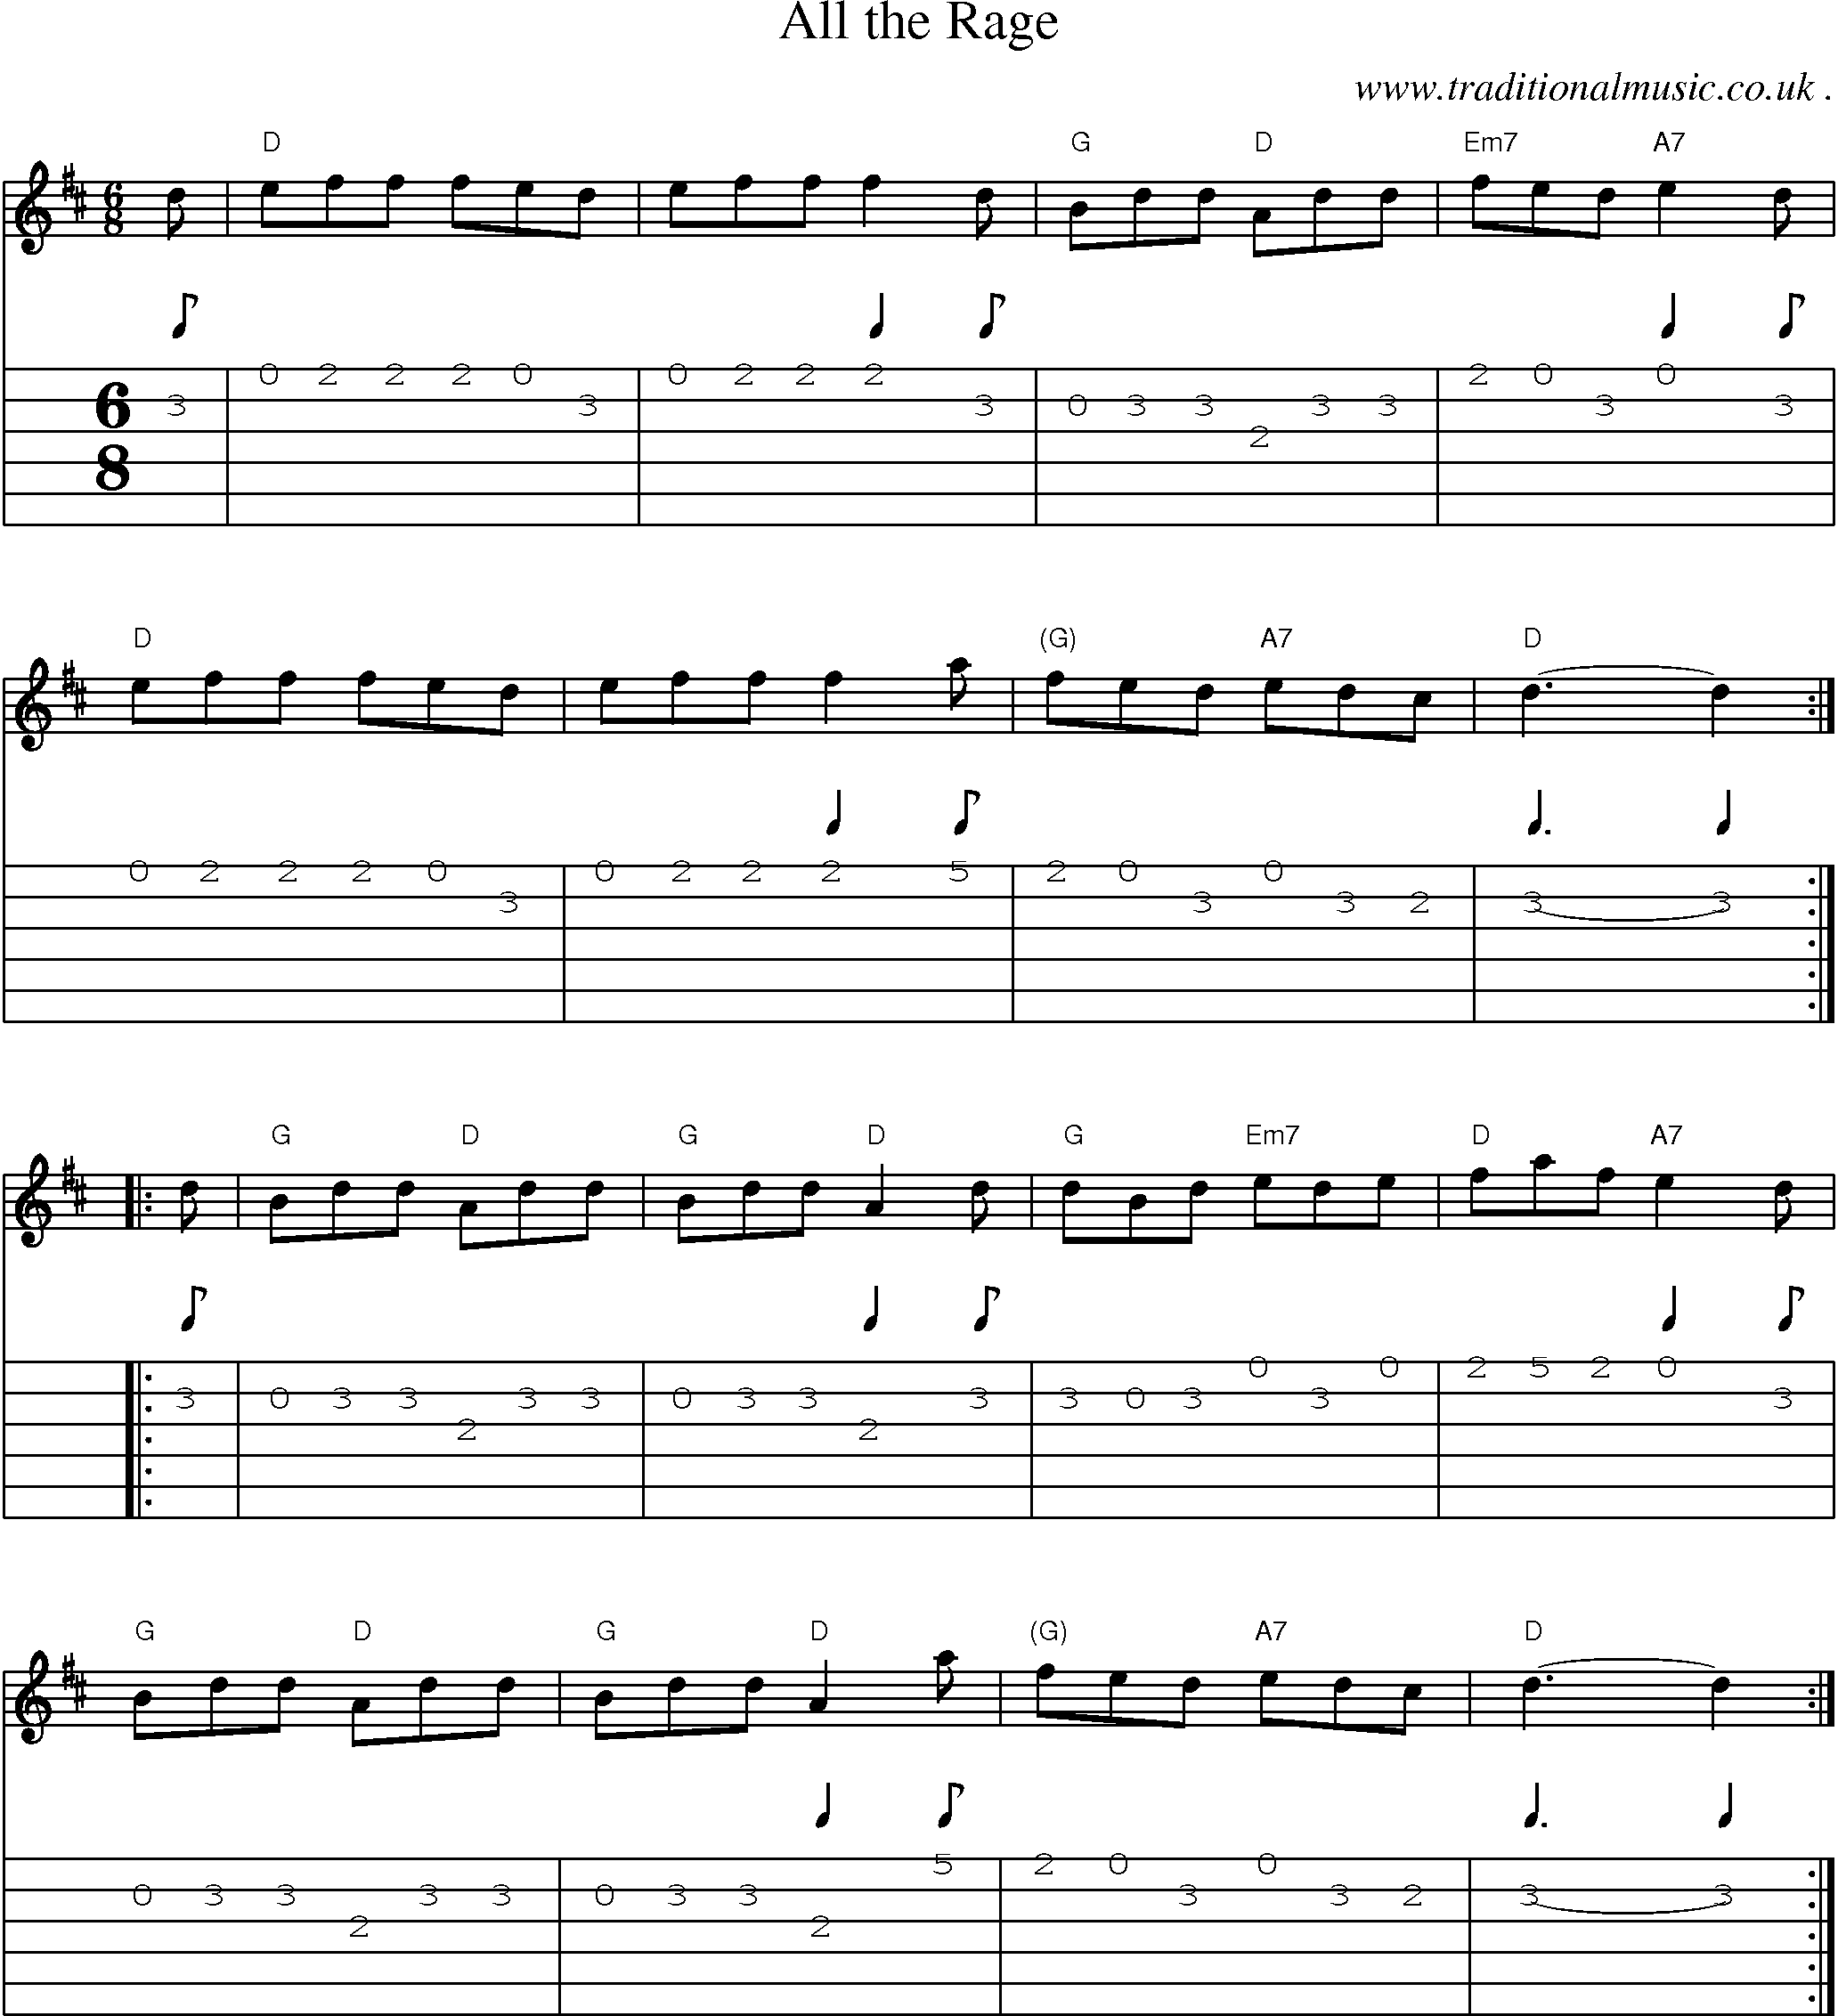 Music Score and Guitar Tabs for All The Rage